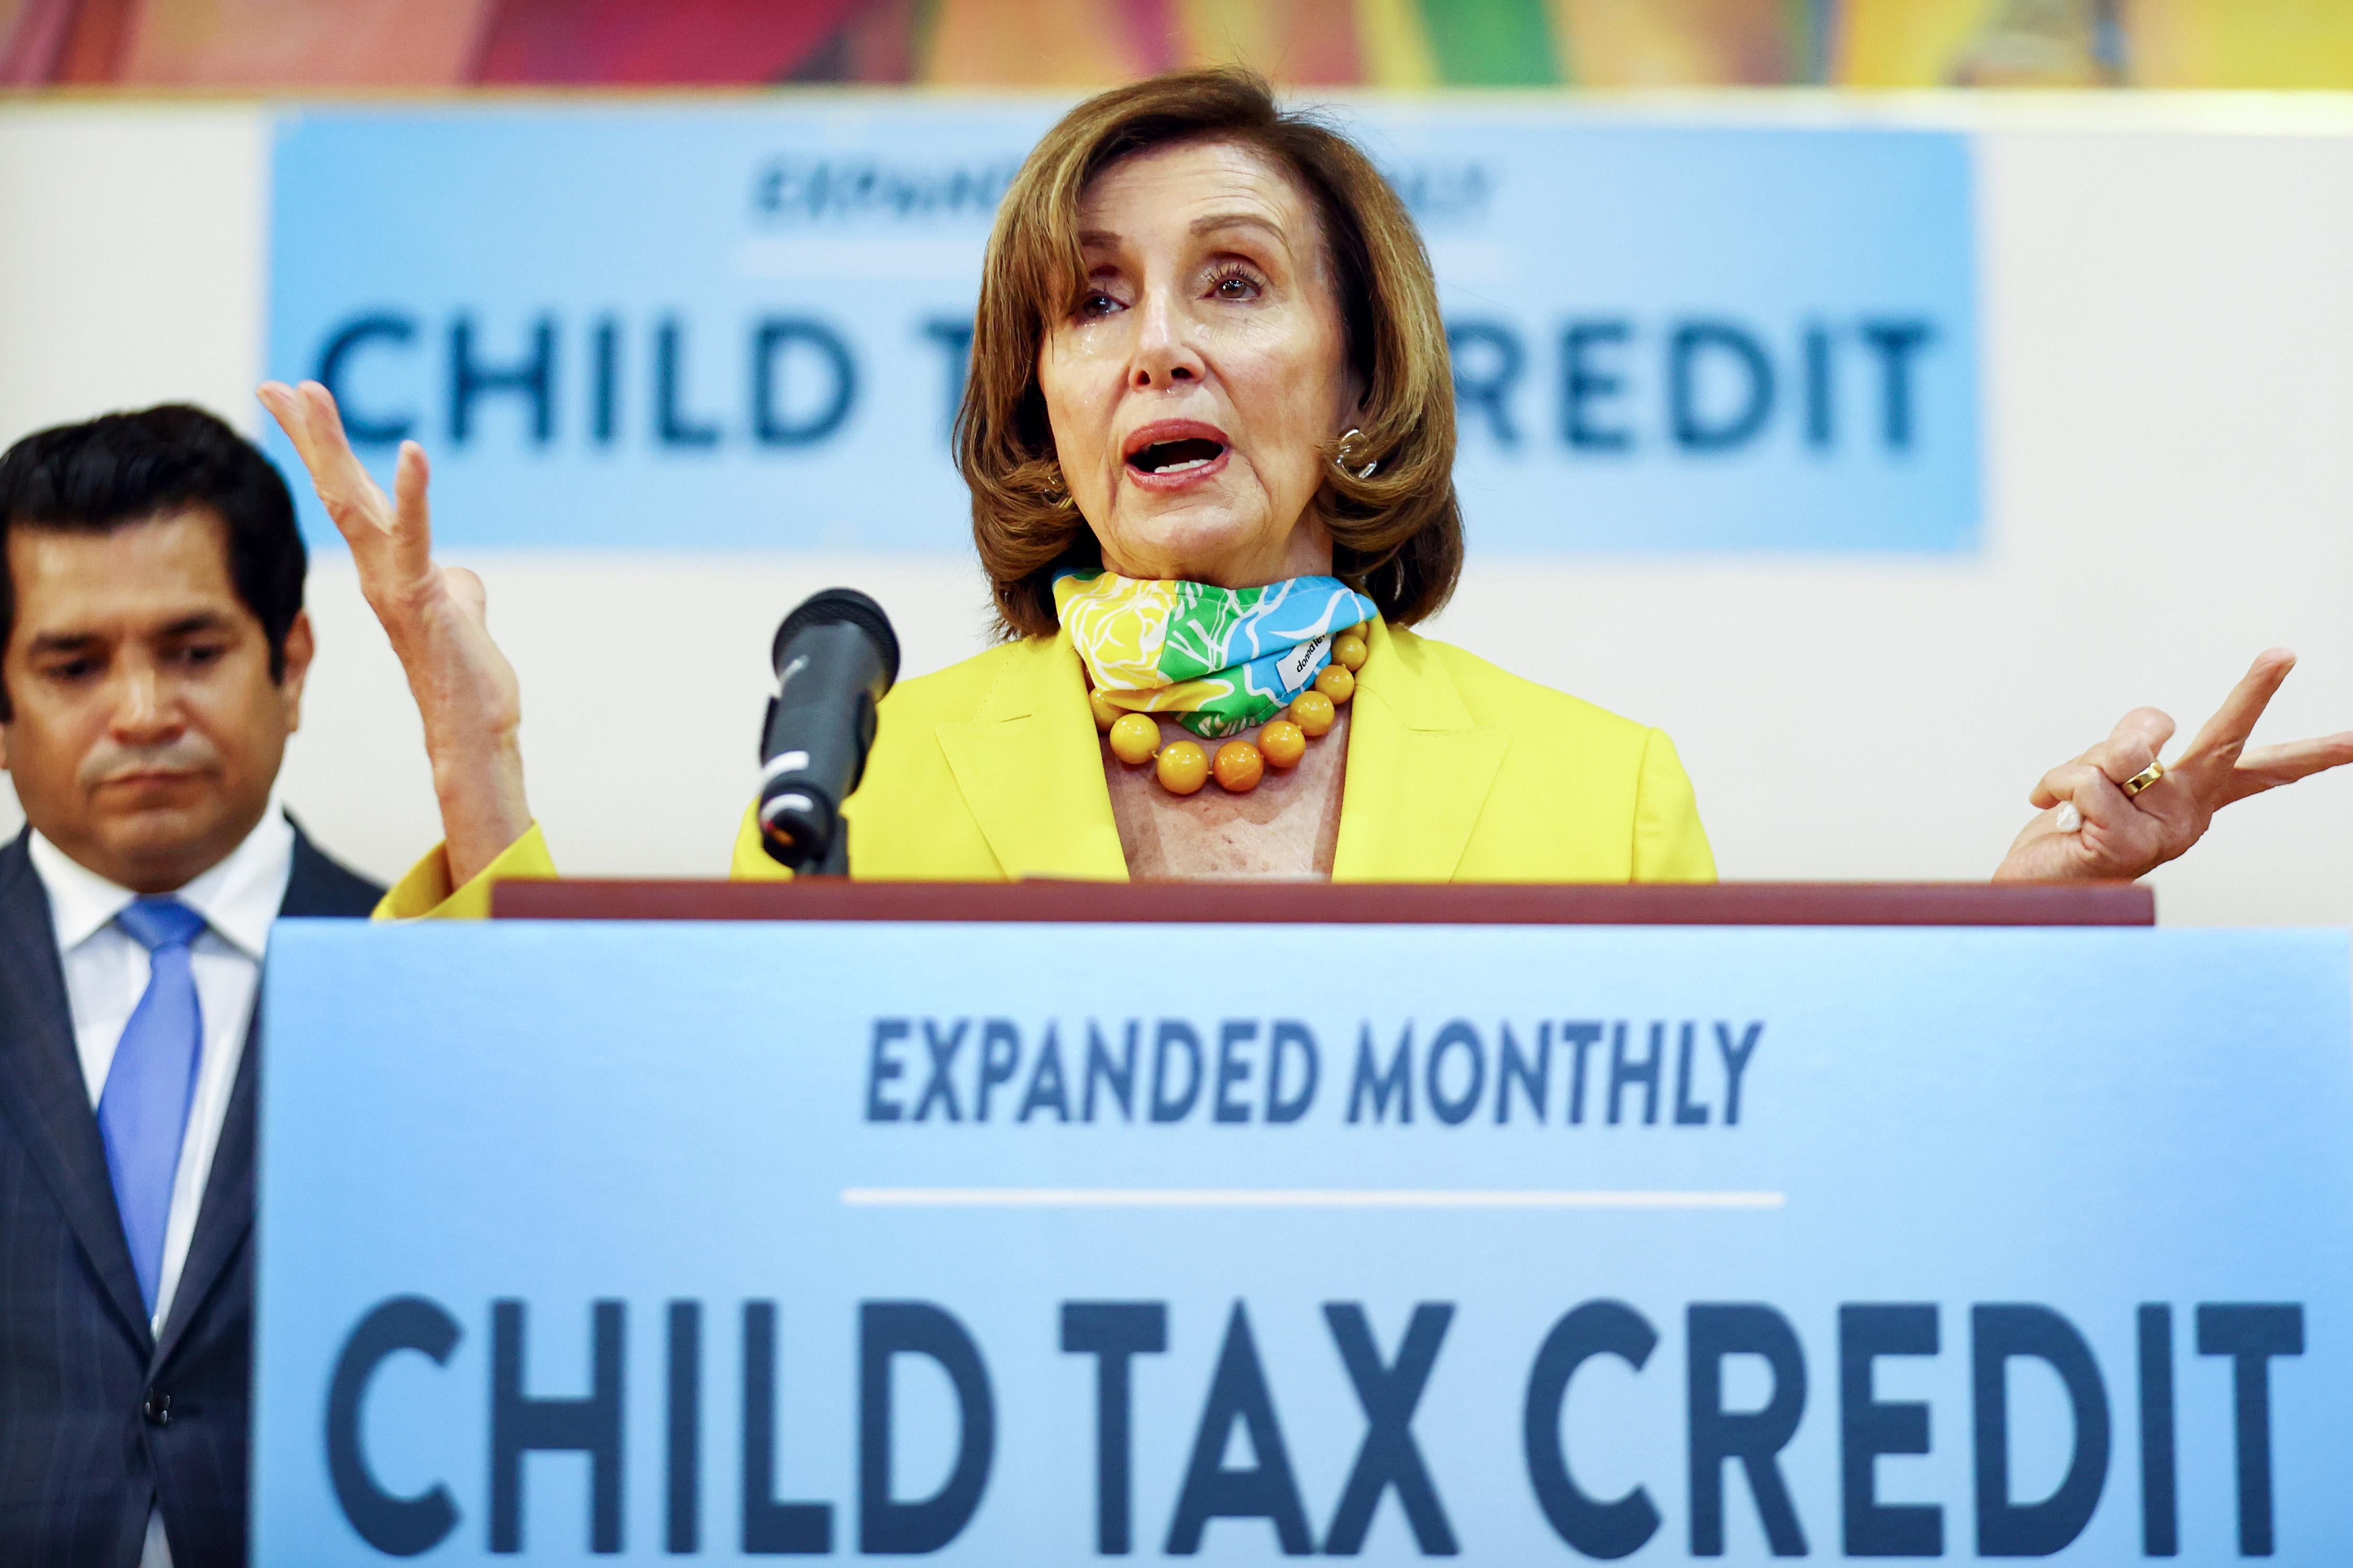 LOS ANGELES, CALIFORNIA - JULY 15: House Speaker Nancy Pelosi (D-CA), C, speaks as Rep. Jimmy Gomez (D-CA) looks on at a press conference on the newly expanded Child Tax Credit at the Barrio Action Youth and Family Center on July 15, 2021 in Los Angeles, California. Many Americans with children began to receive checks today as a result of the passage of the Child Tax Credit legislation. (Photo by Mario Tama/Getty Images)